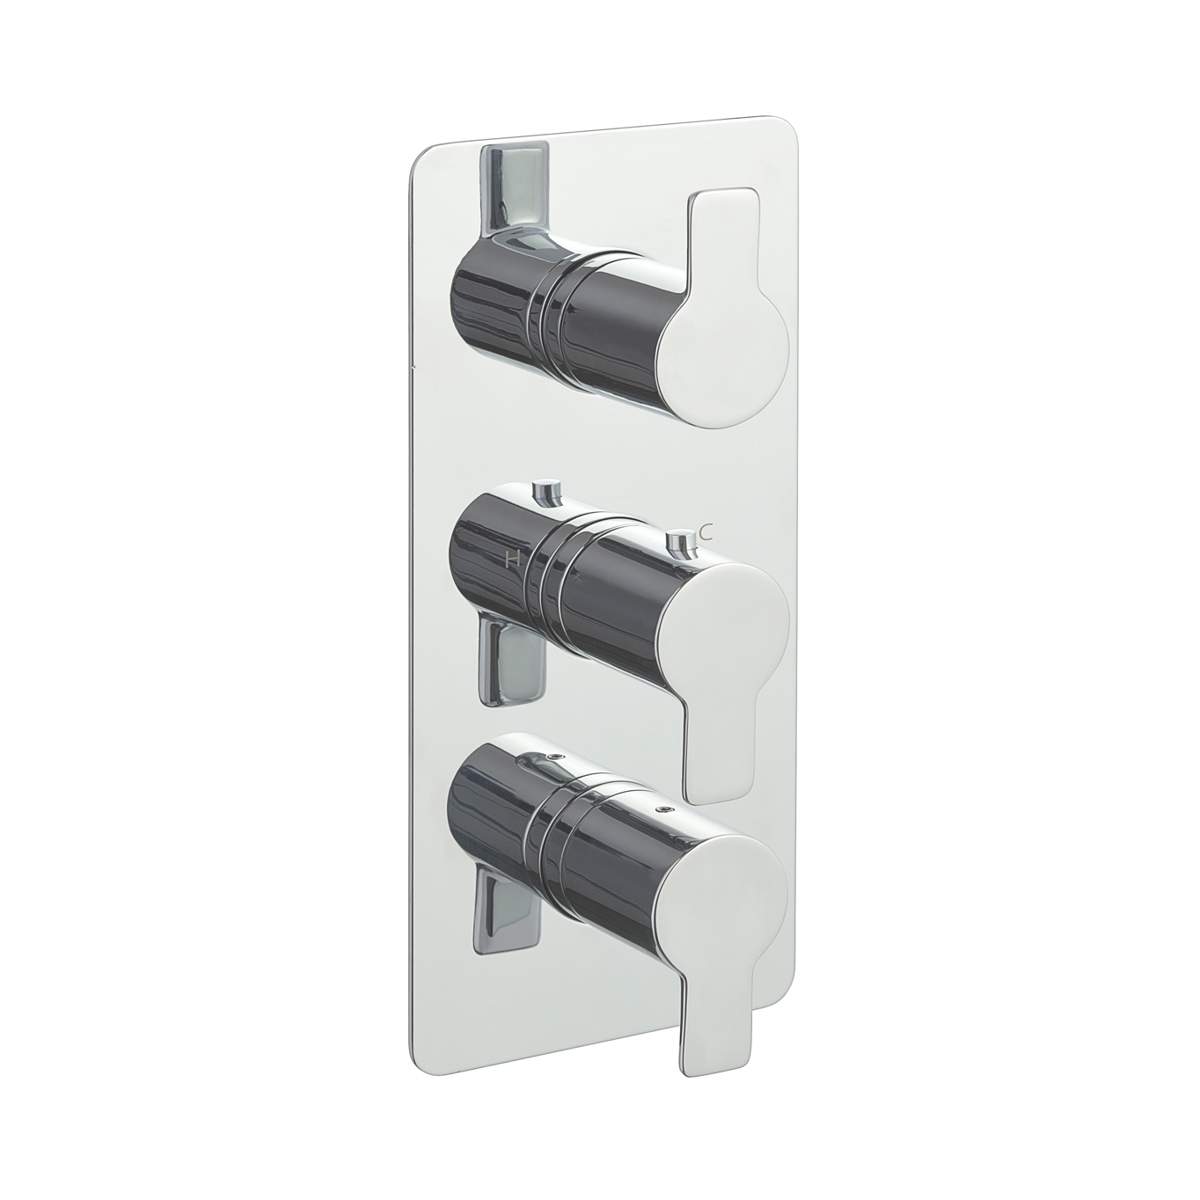 JTP Amore 2 Outlet Thermostat - 79690